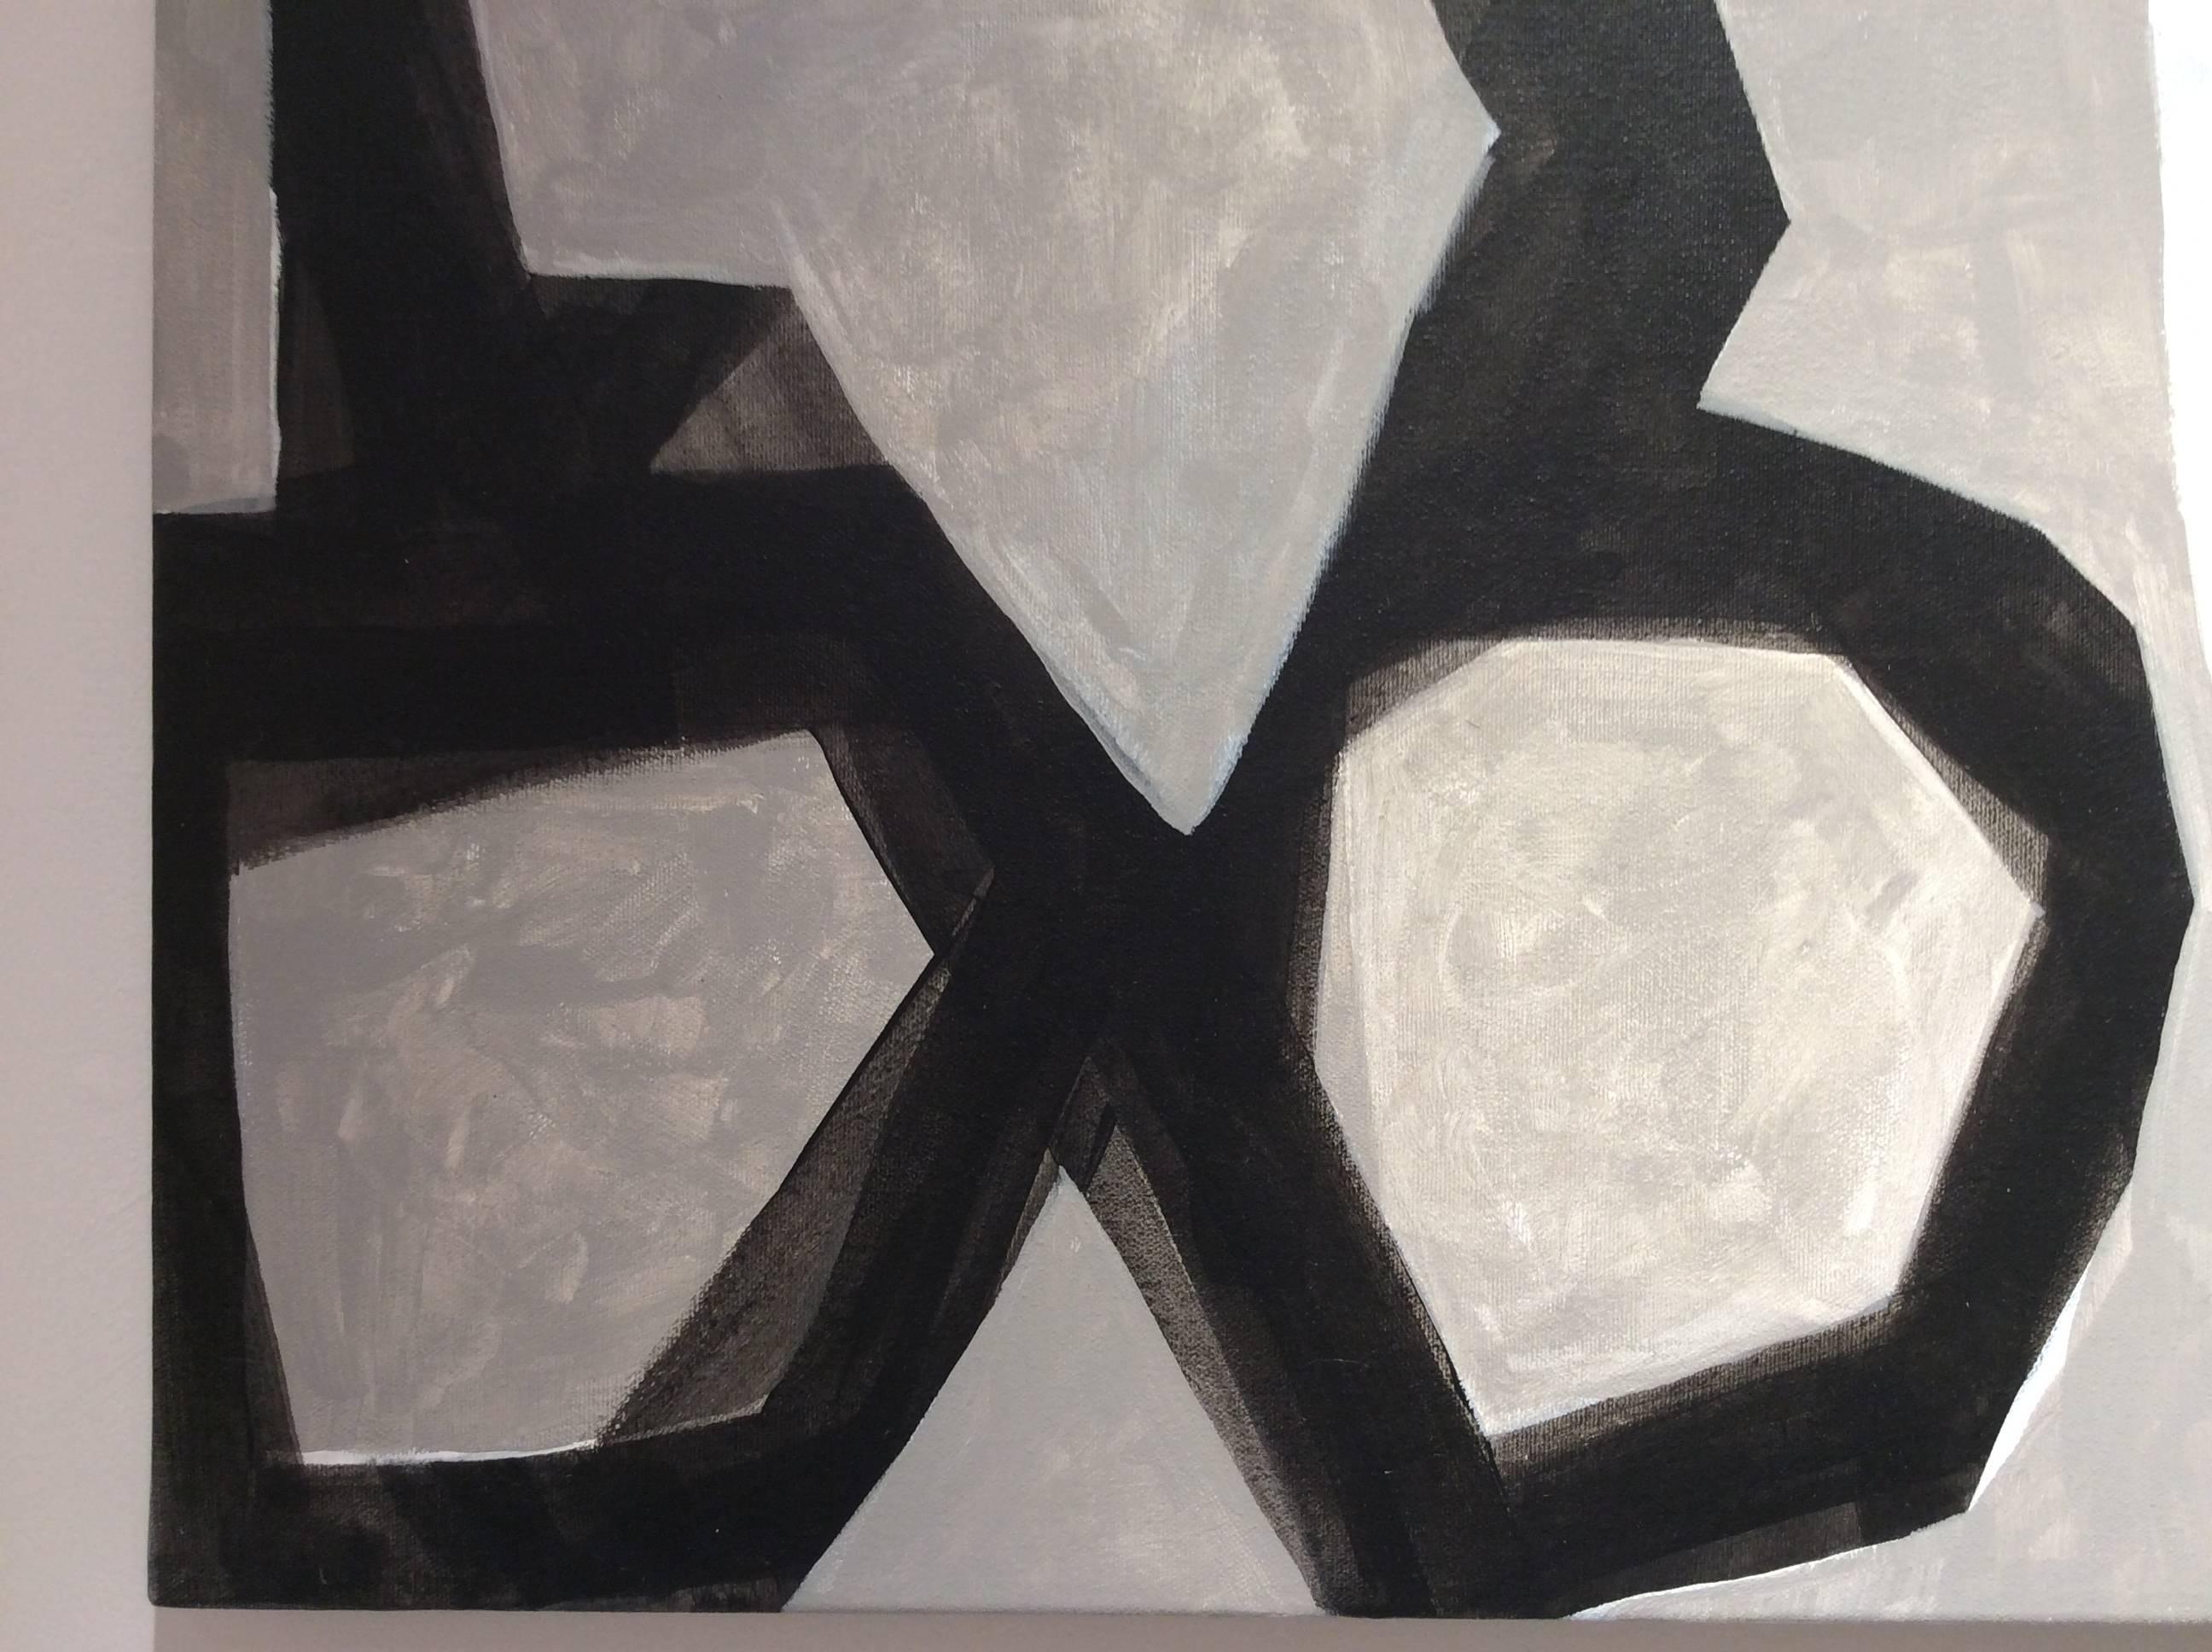 Windfall #1 (Abstract Mid Century Modern Style Painting in Grey, White & Black) 2